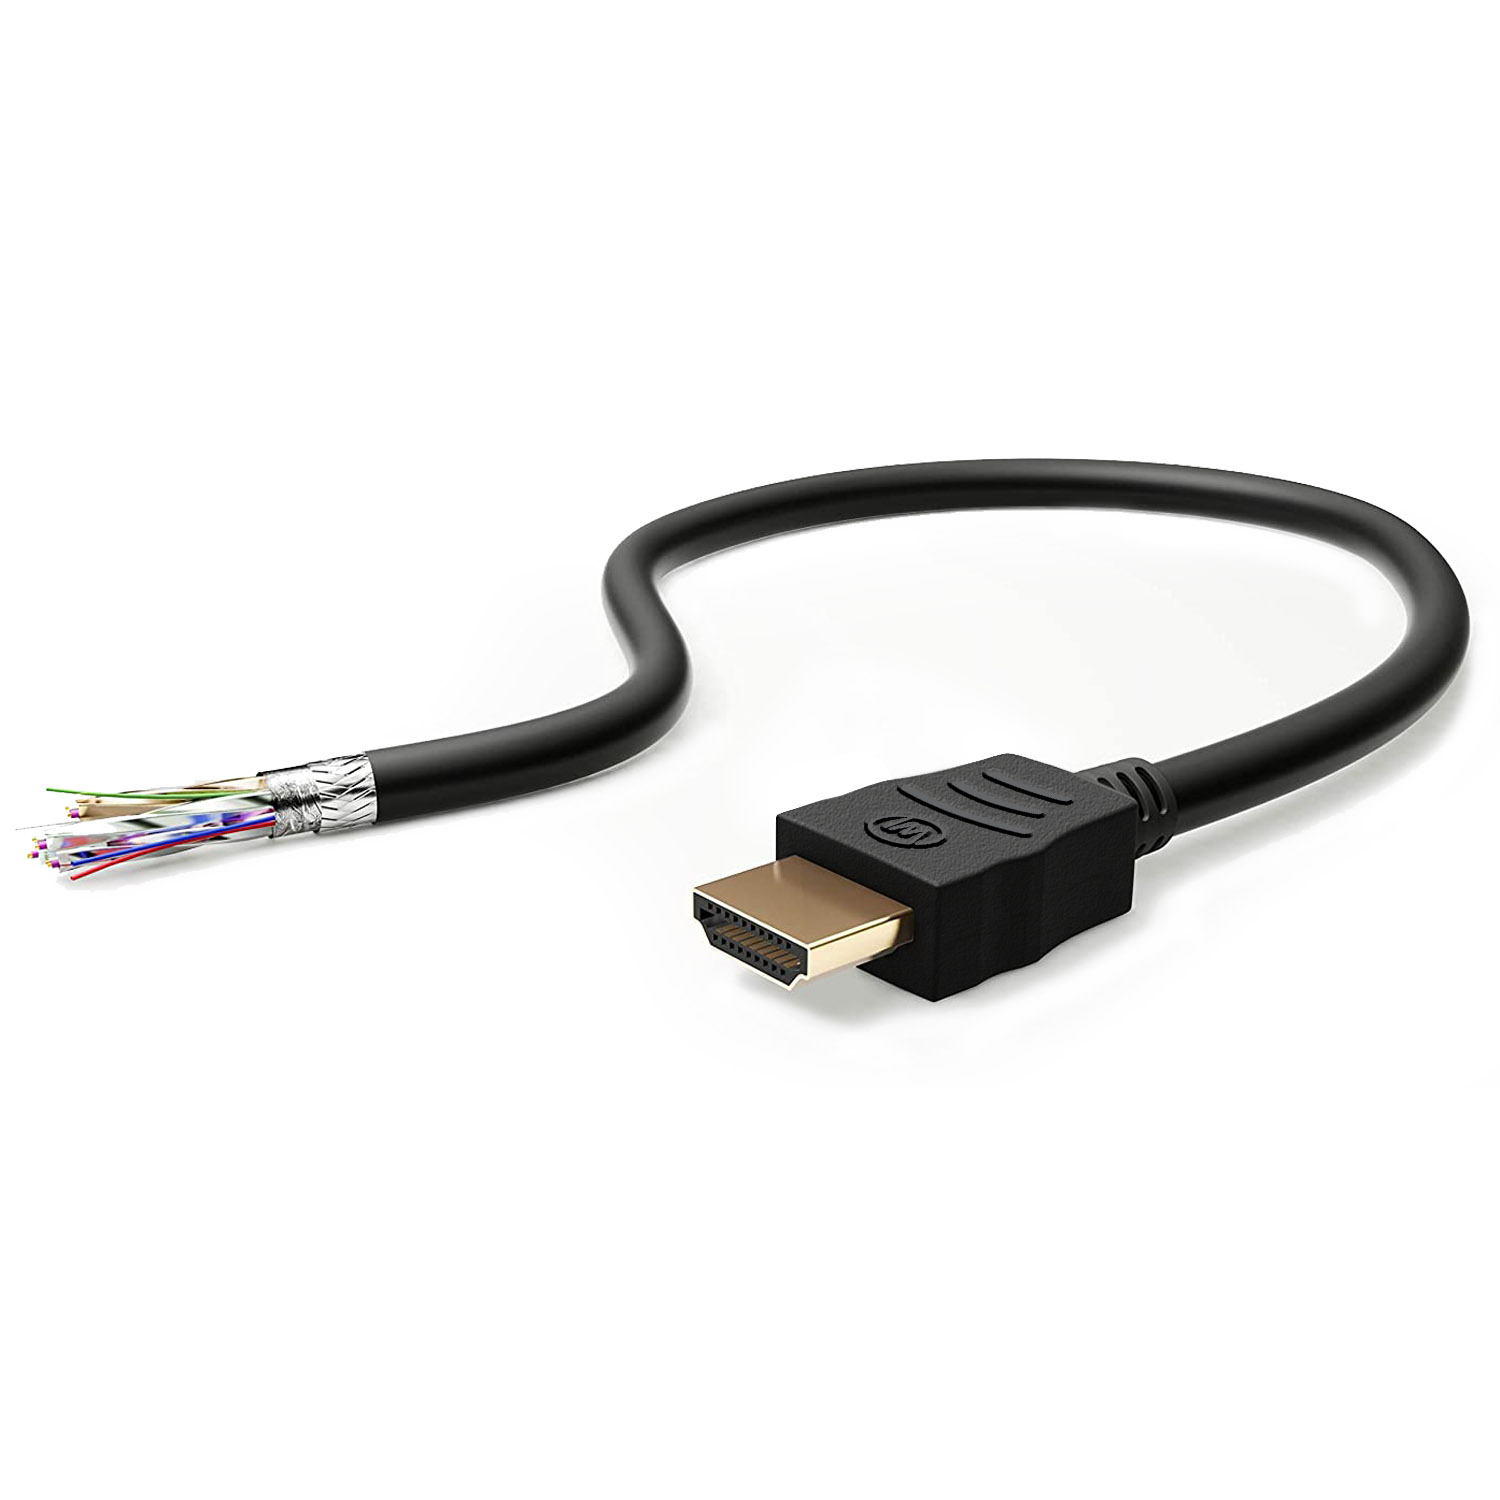 CHILI für WICKED 10, 2m UHD 5 X HDCP Playstation II, ARC, S, Xbox HDMI-Kabel / Kabel Sonos 2.2, 8K eARC, HDR PS5, HDMI 2.1,